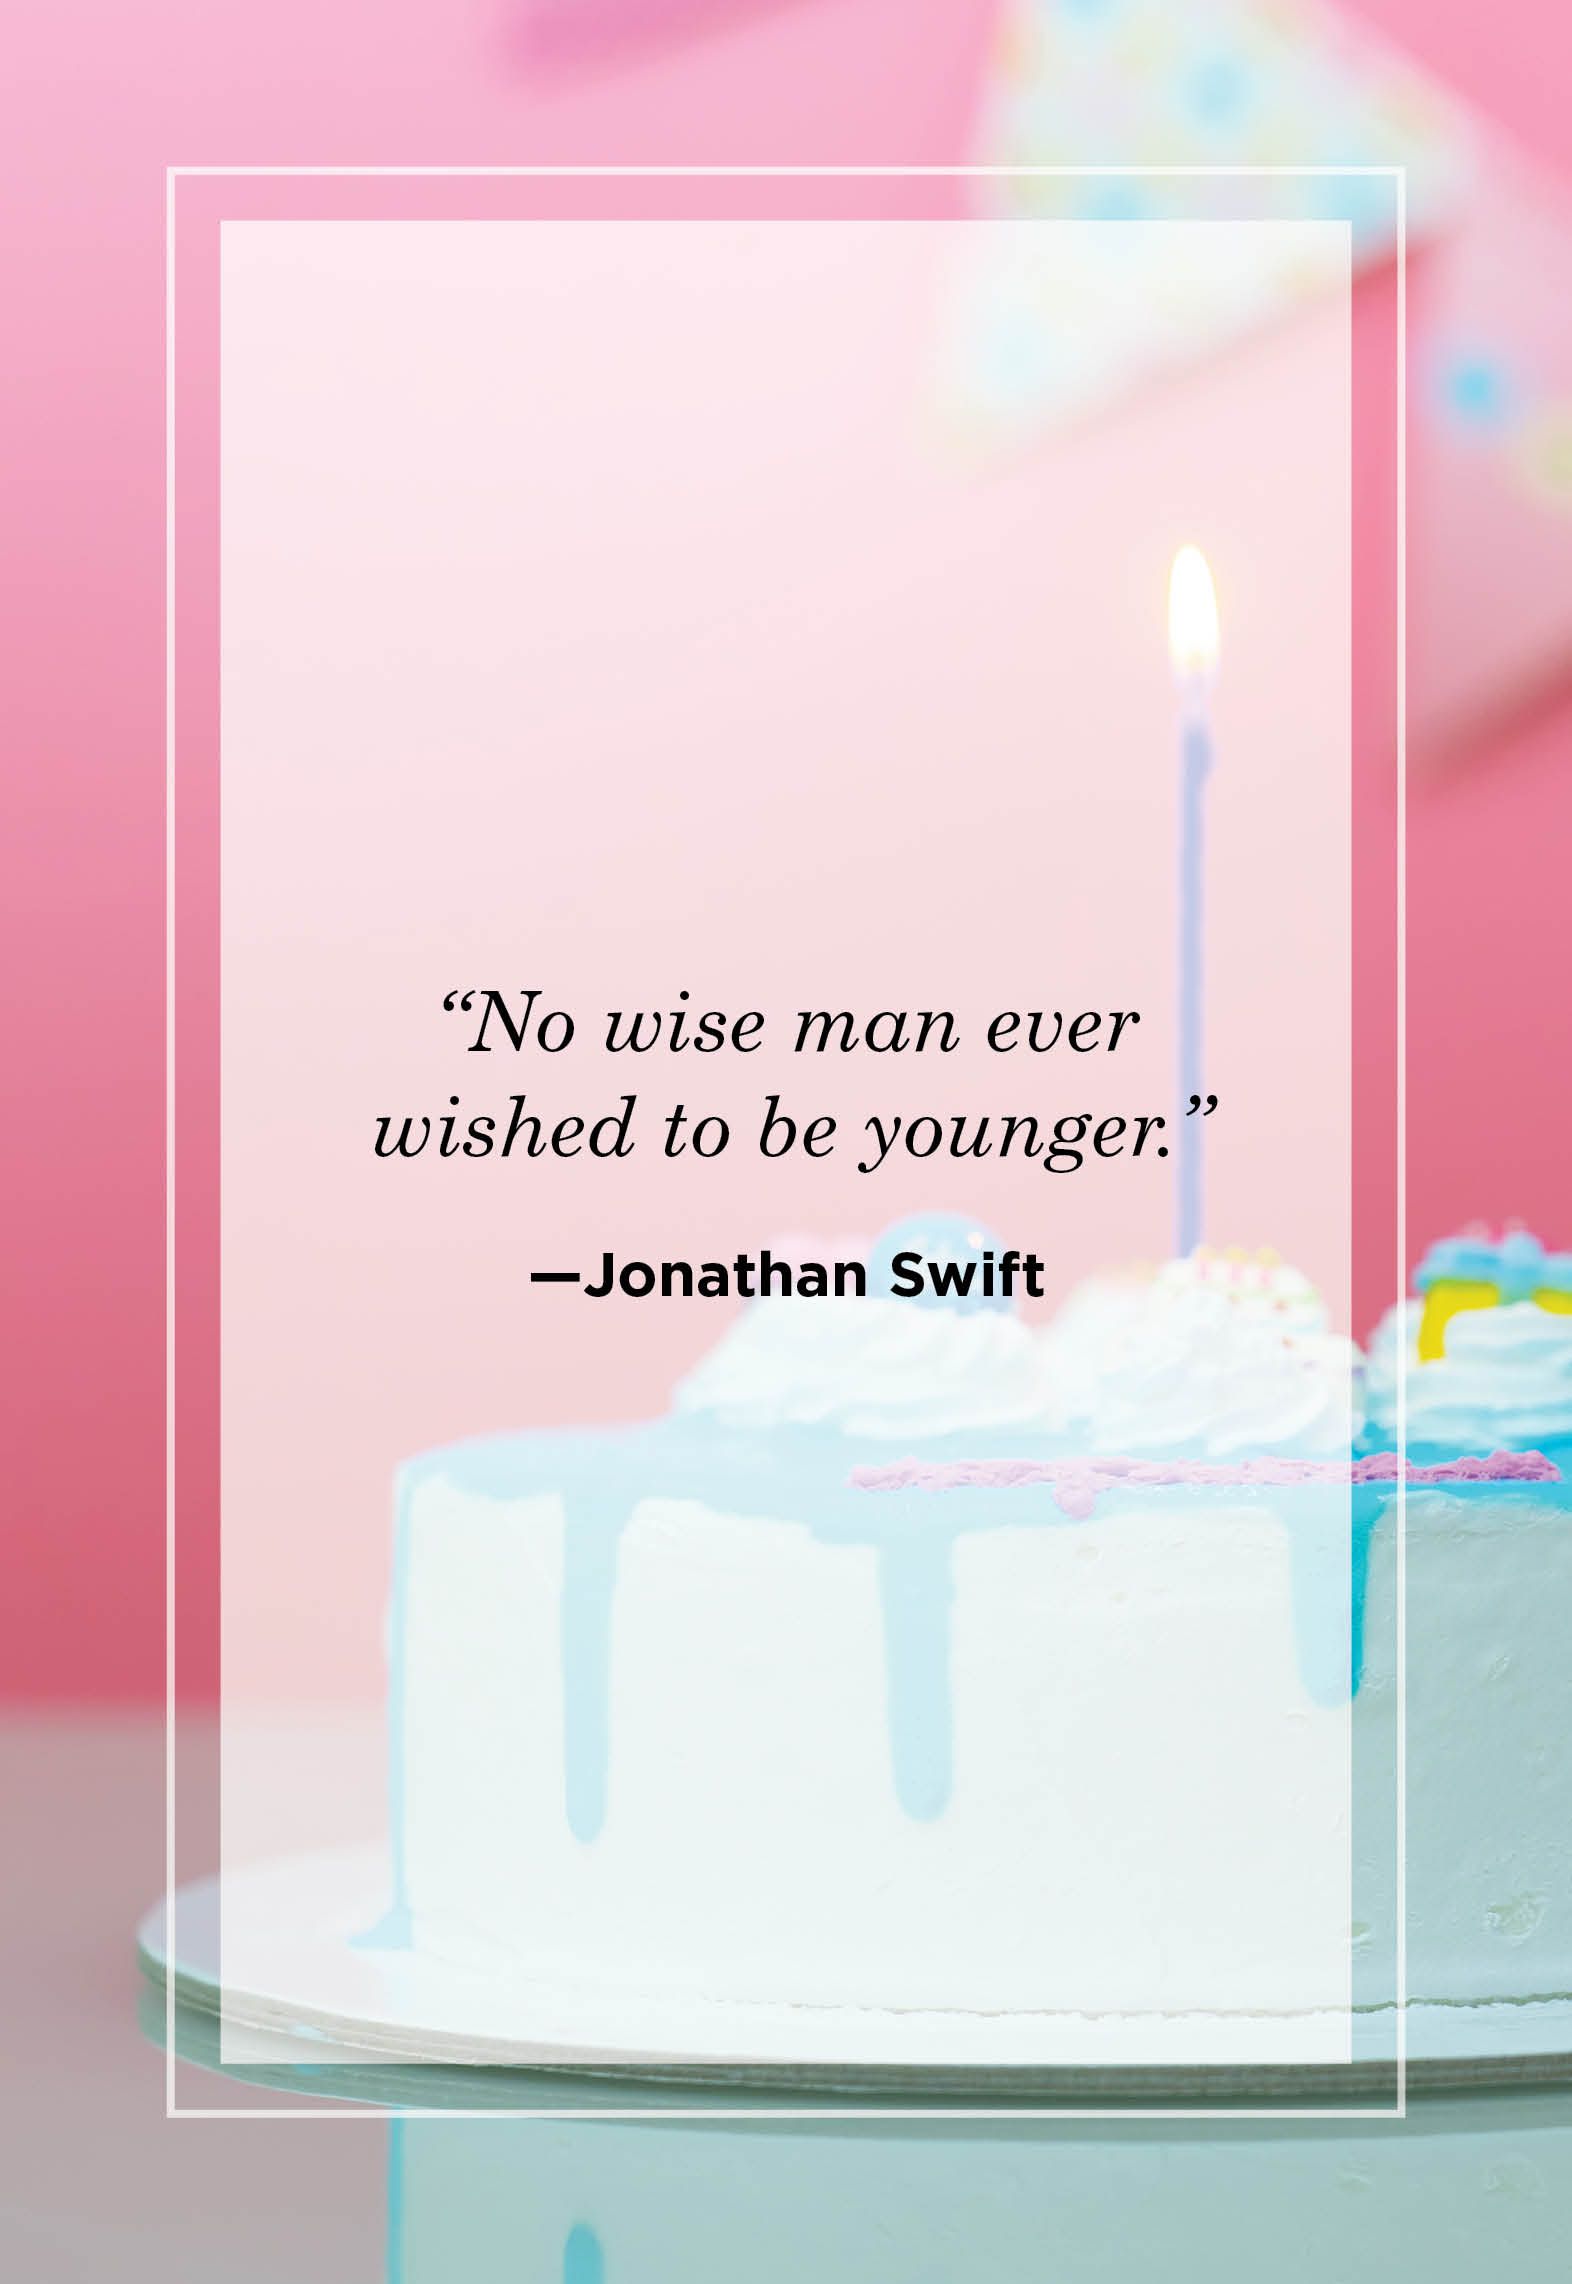 74 Best Birthday Quotes And Wishes For Friends - Our Mindful Life